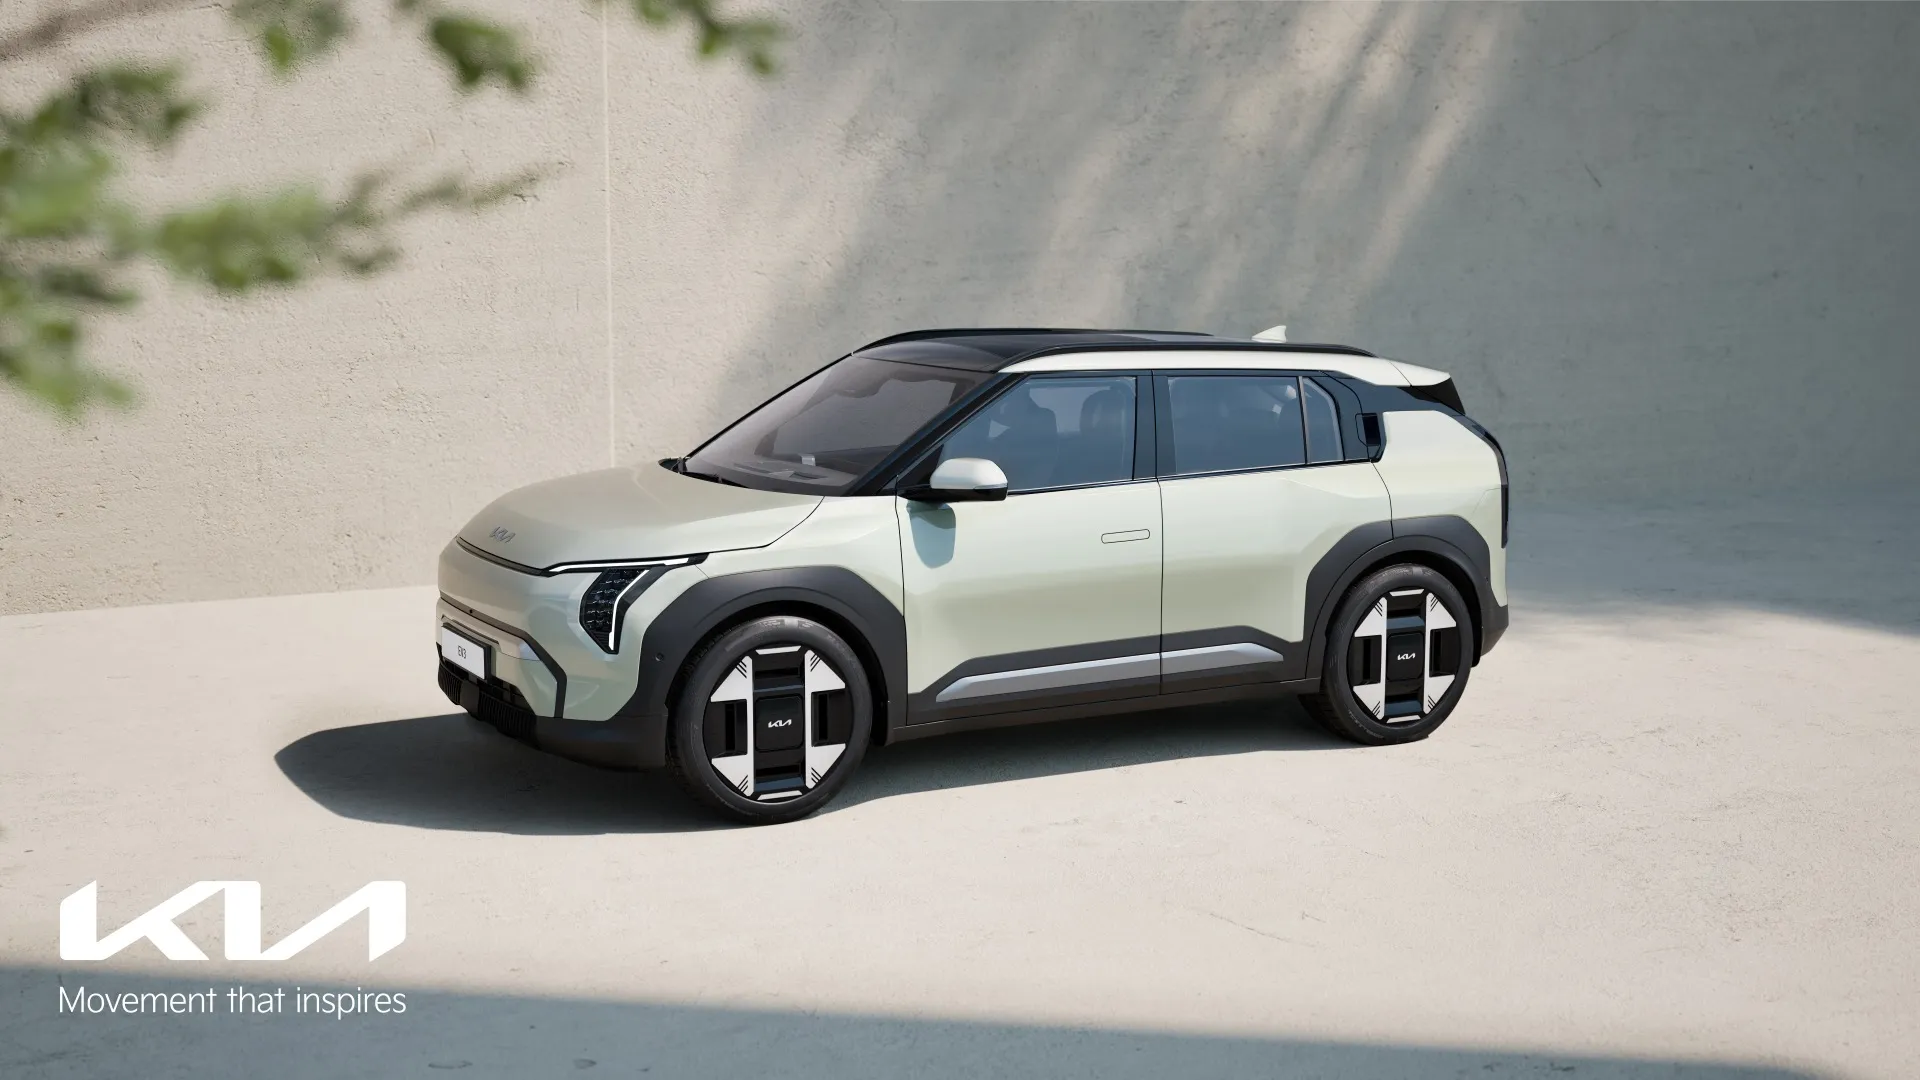 Kia unveils the EV3 subcompact crossover, offering a range of up to 372 miles, fast charging, and advanced technology, making it a compact yet powerful addition to their EV lineup.